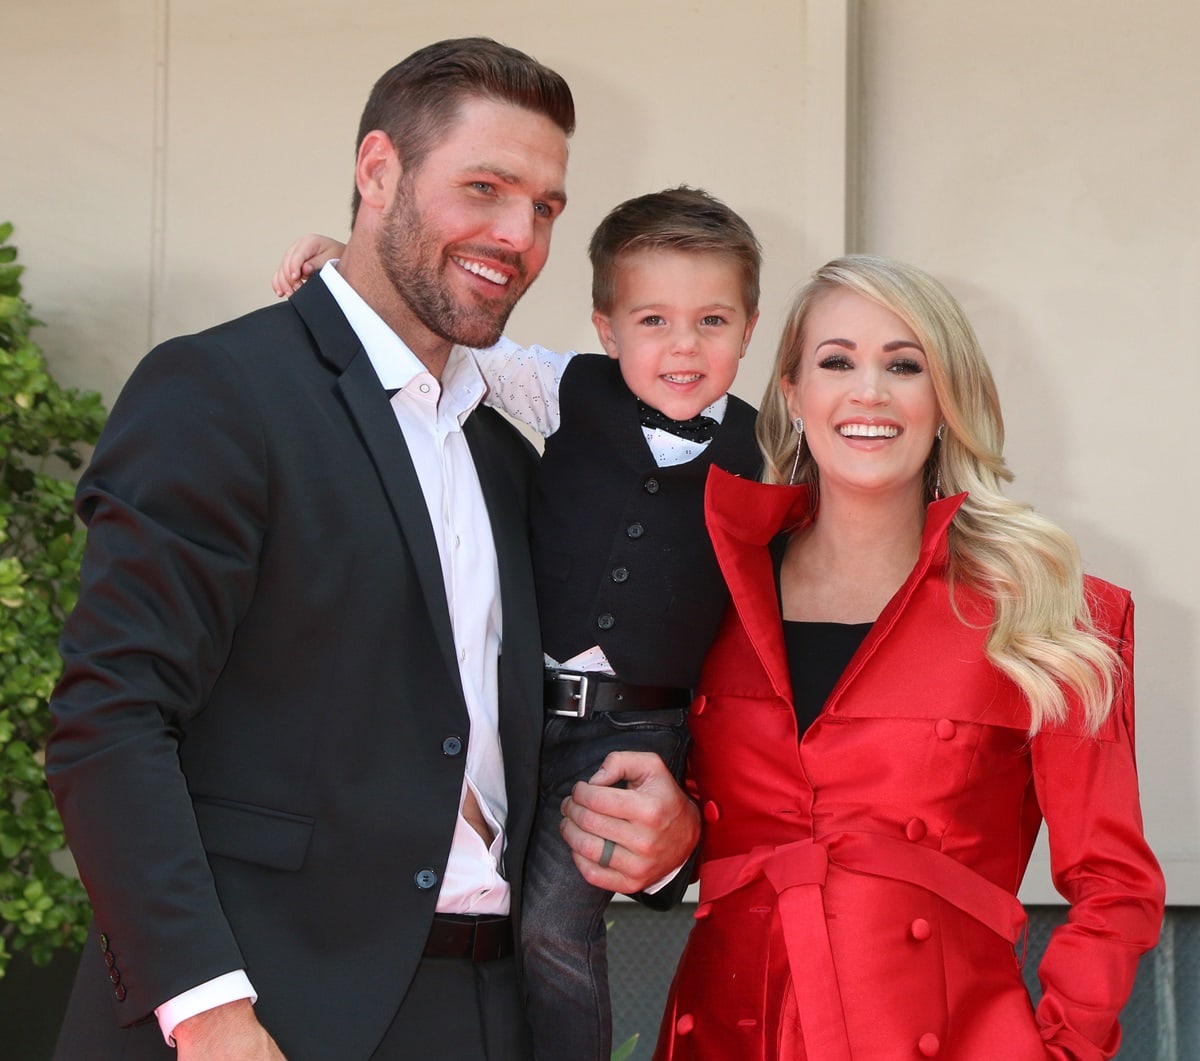 Carrie Underwood, who was pregnant with her second child, received a star on the Hollywood Walk of Fame and was joined by her husband, Mike Fisher, and her son, Isaiah Fisher, on the Hollywood Walk of Fame